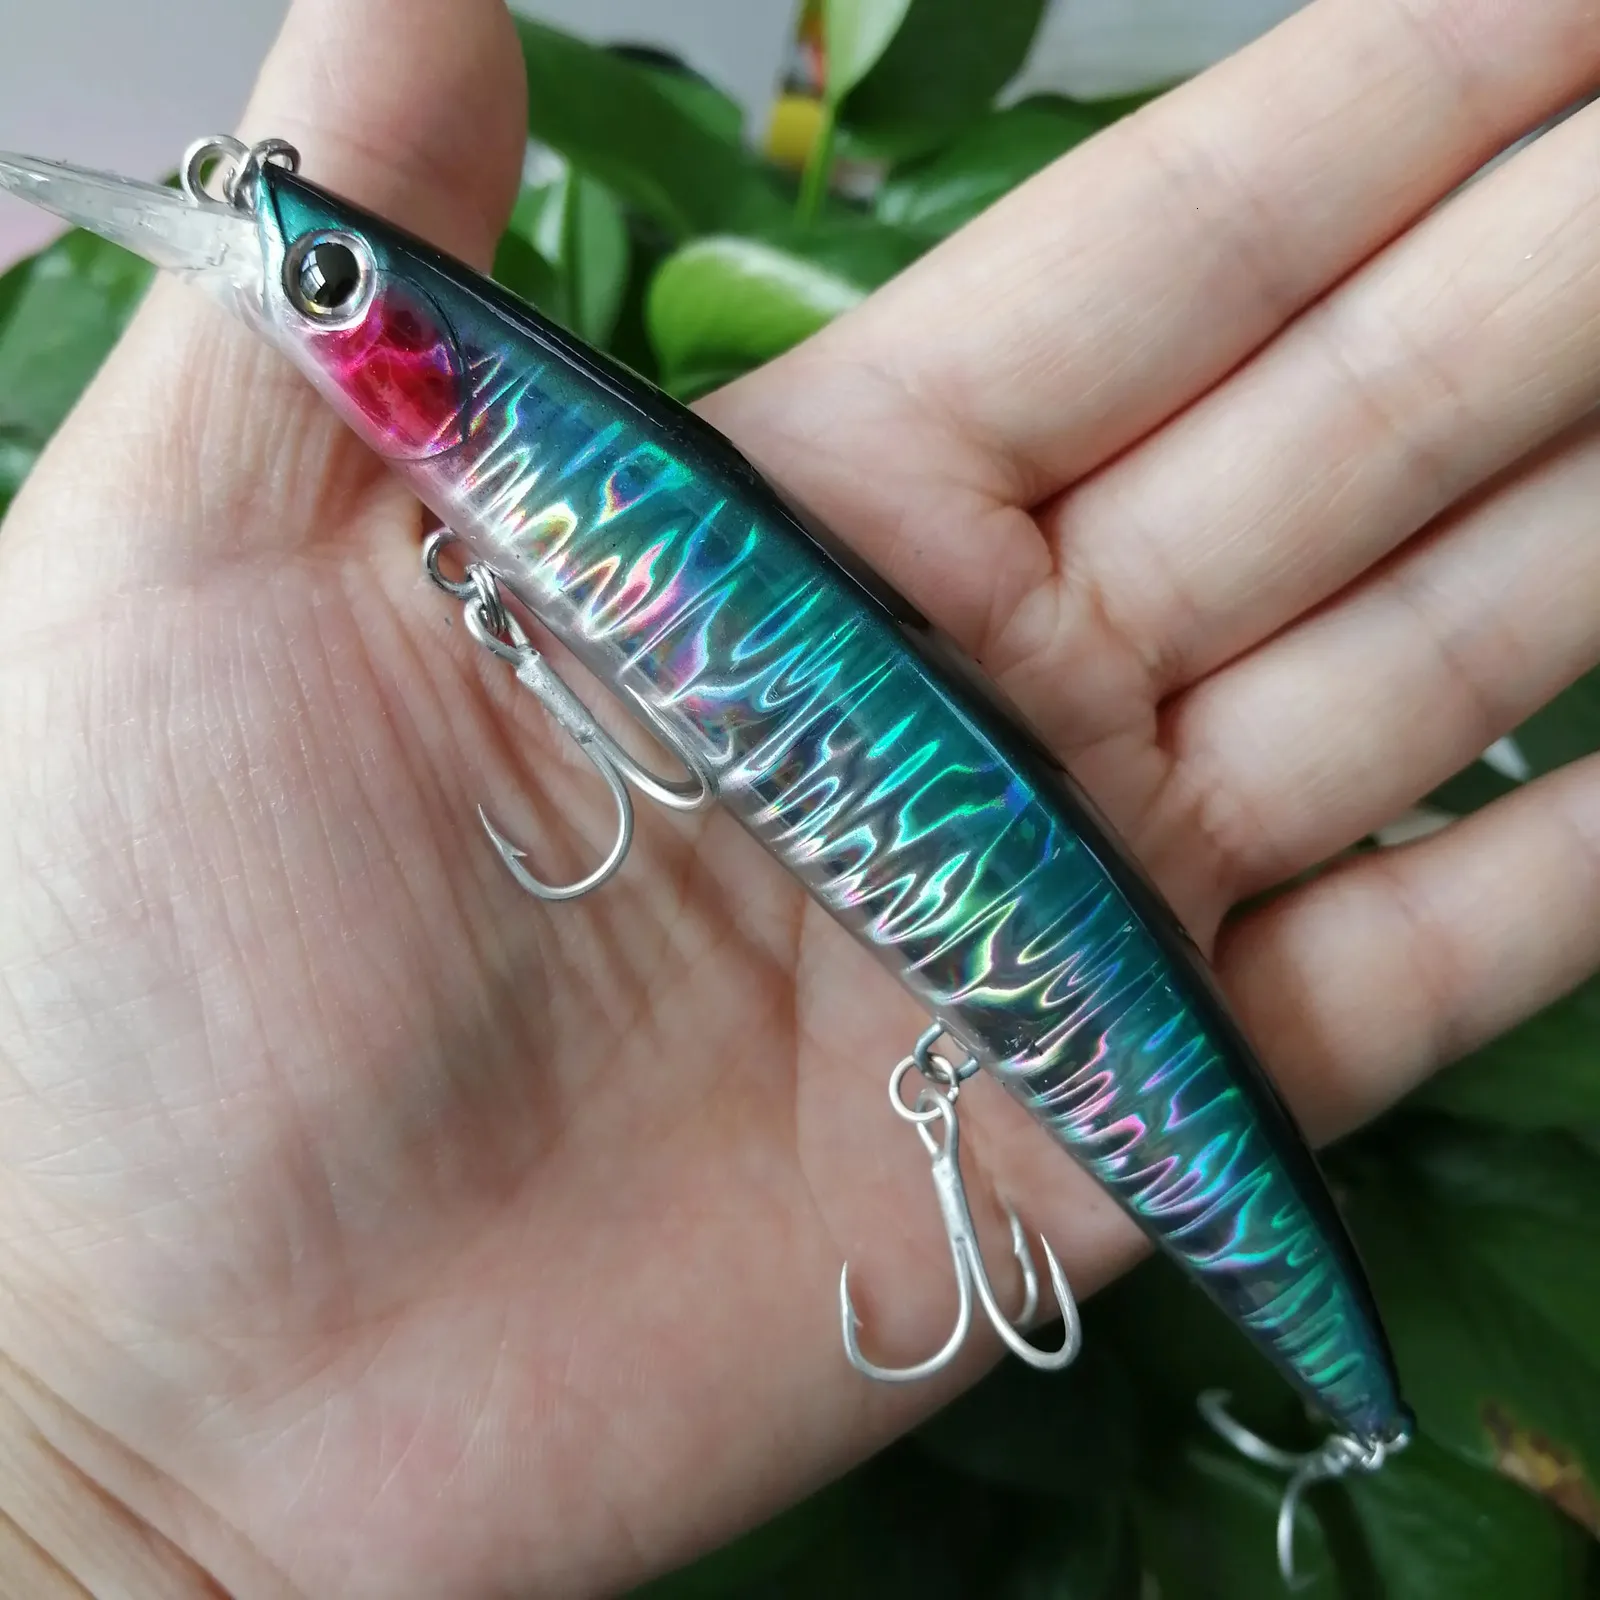 Floating Lures For Trout